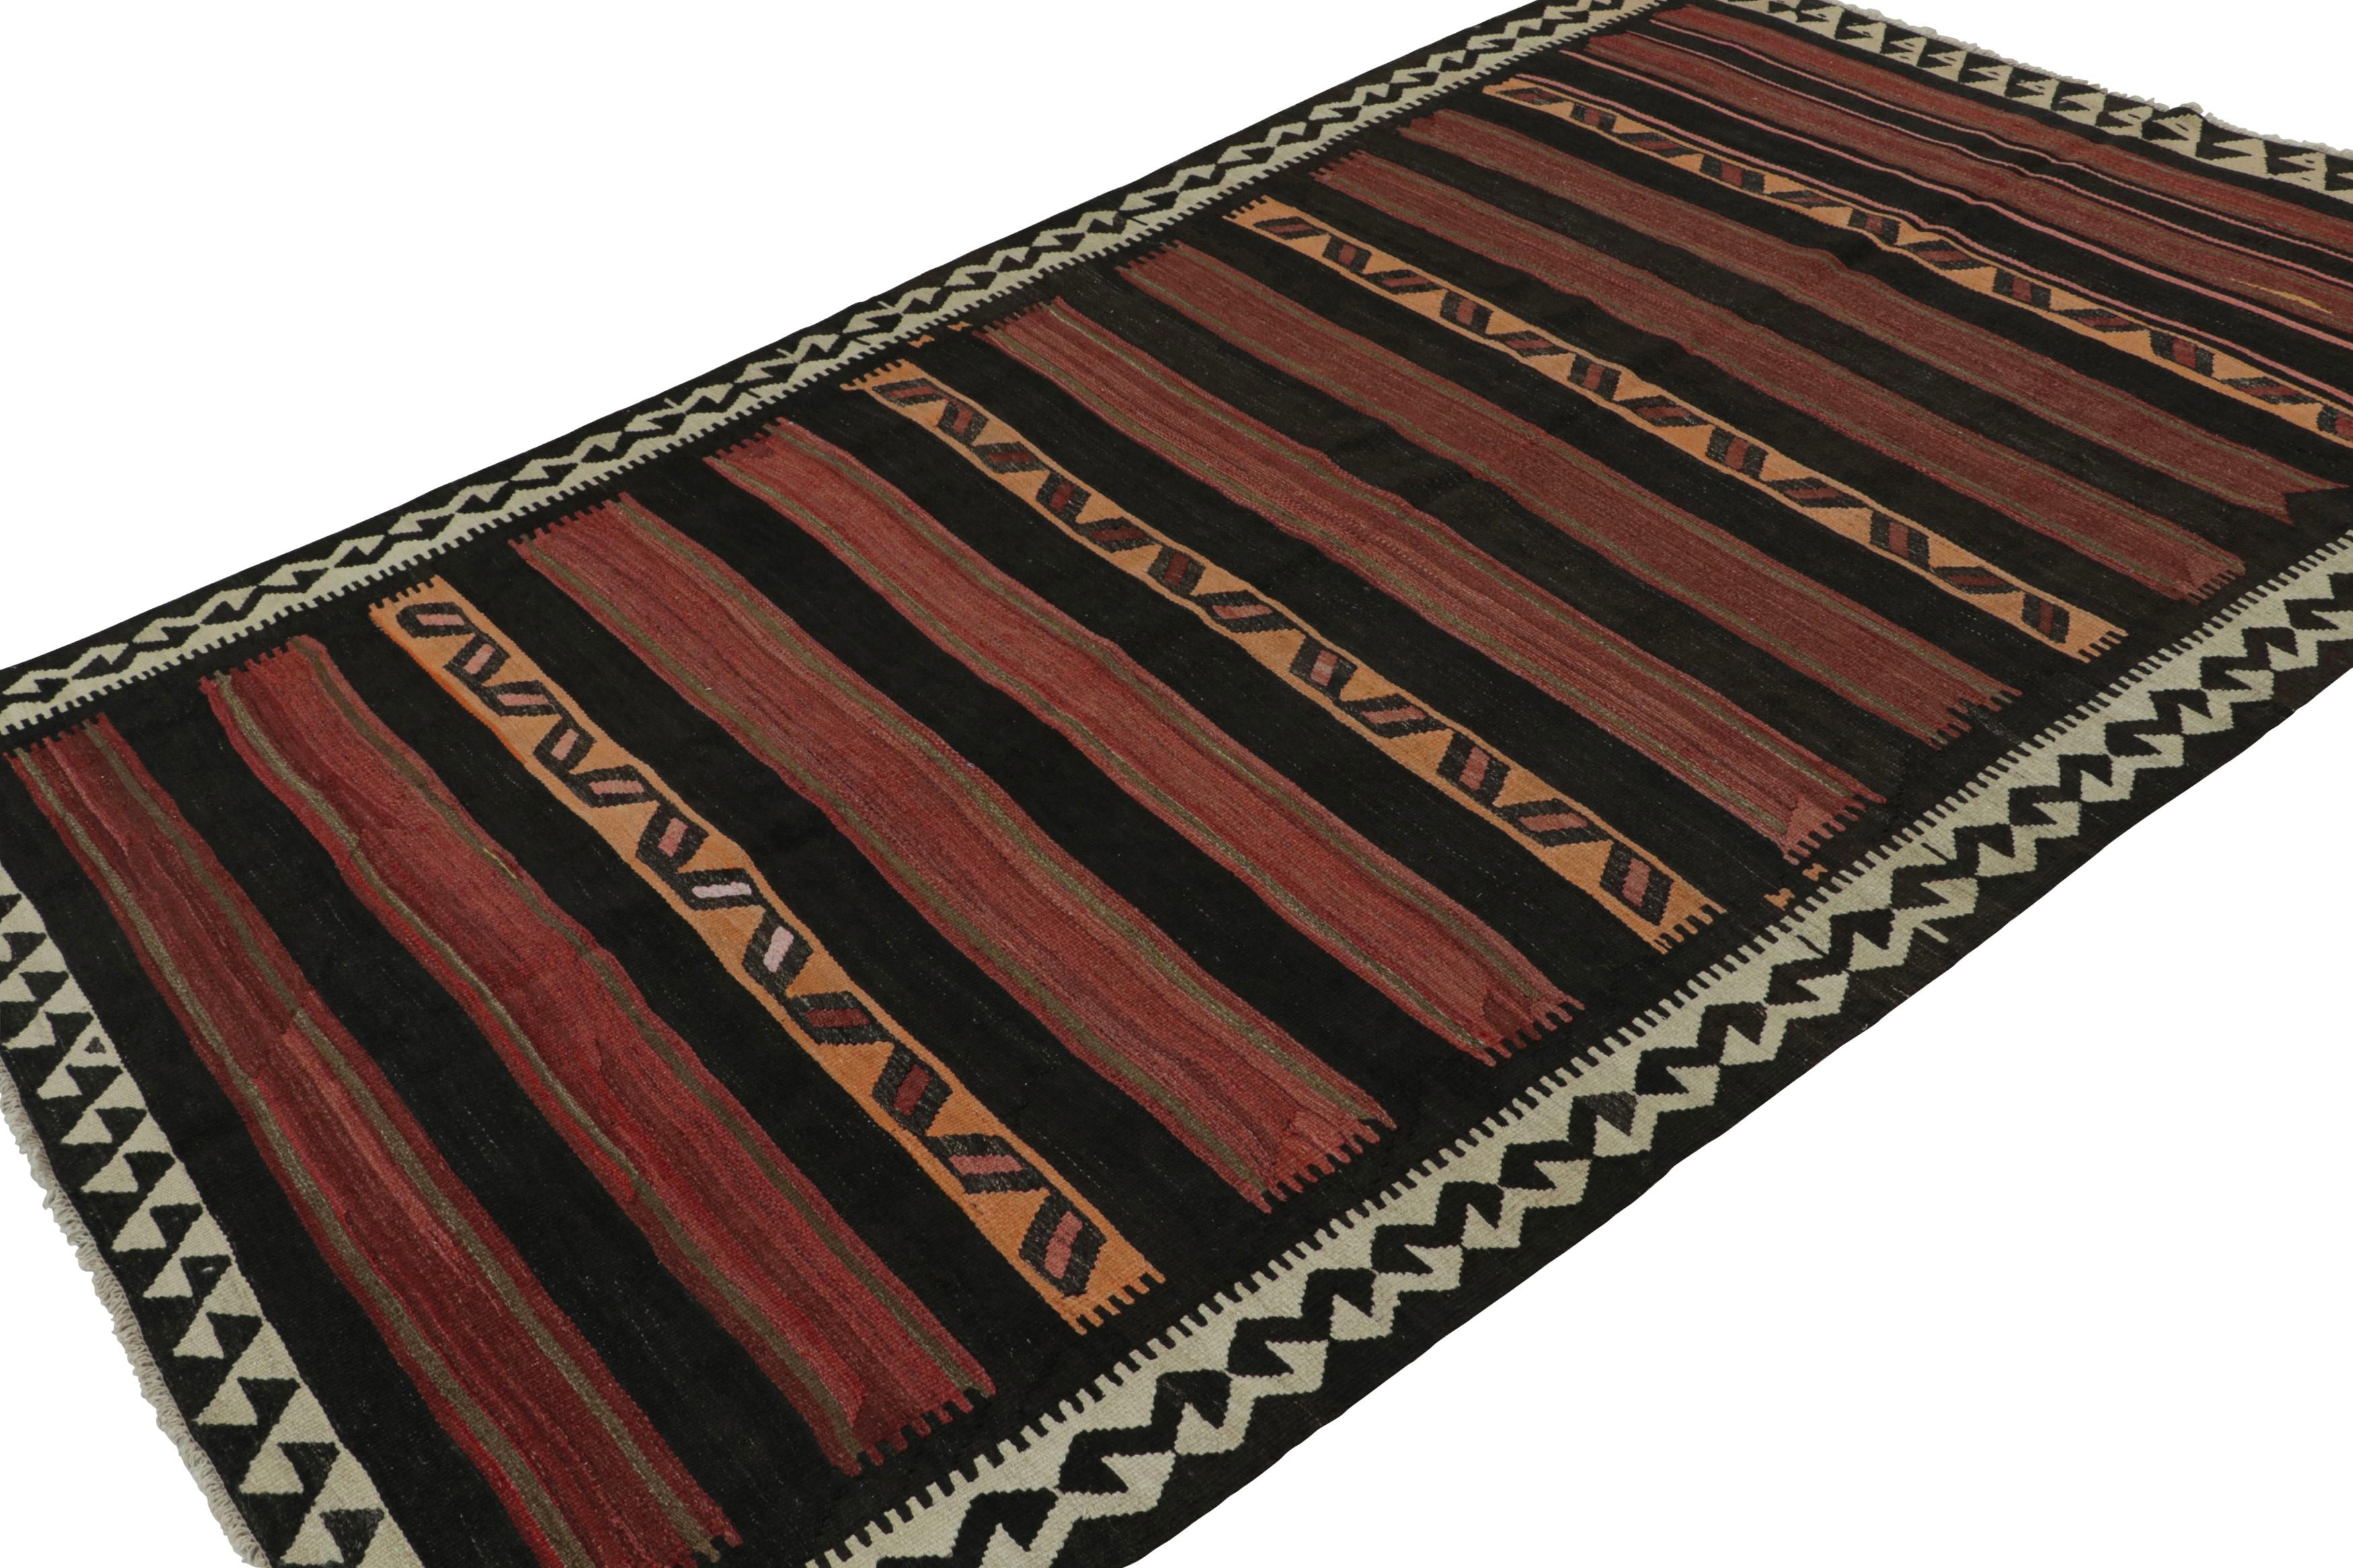 Handwoven in wool, circa 1950-1960, this 6x10 vintage Afghan tribal kilim, in masculine hues of brown, red, orange, black and green border, features fencepost geometric patterns across the entire field. 

On the design: 

As an exciting new curation